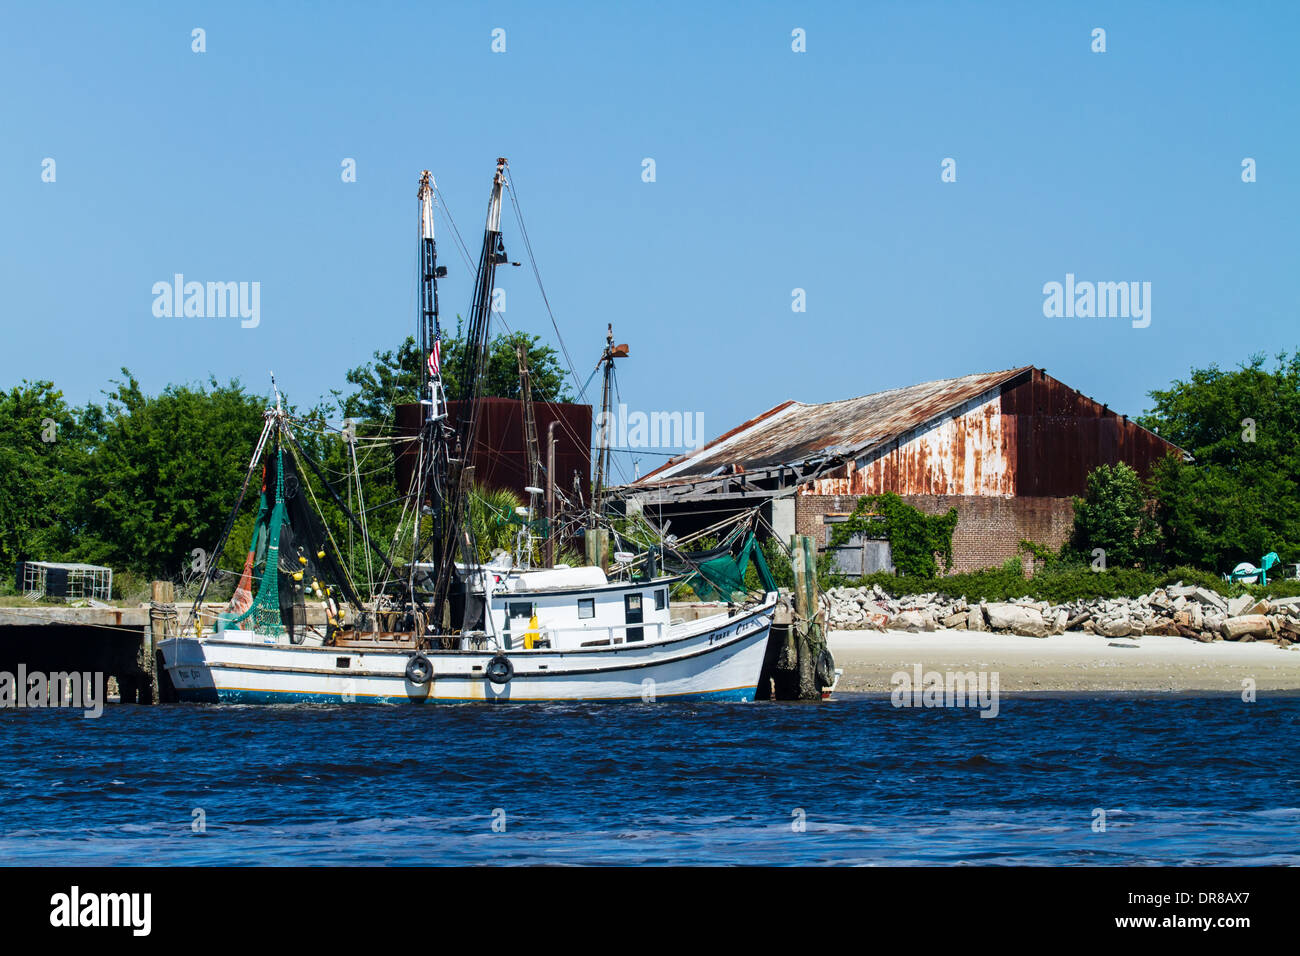 A shrimp boat along a dock in the birthplace of the modern shrimping industry, Fernandina Beach, Florida. Stock Photo